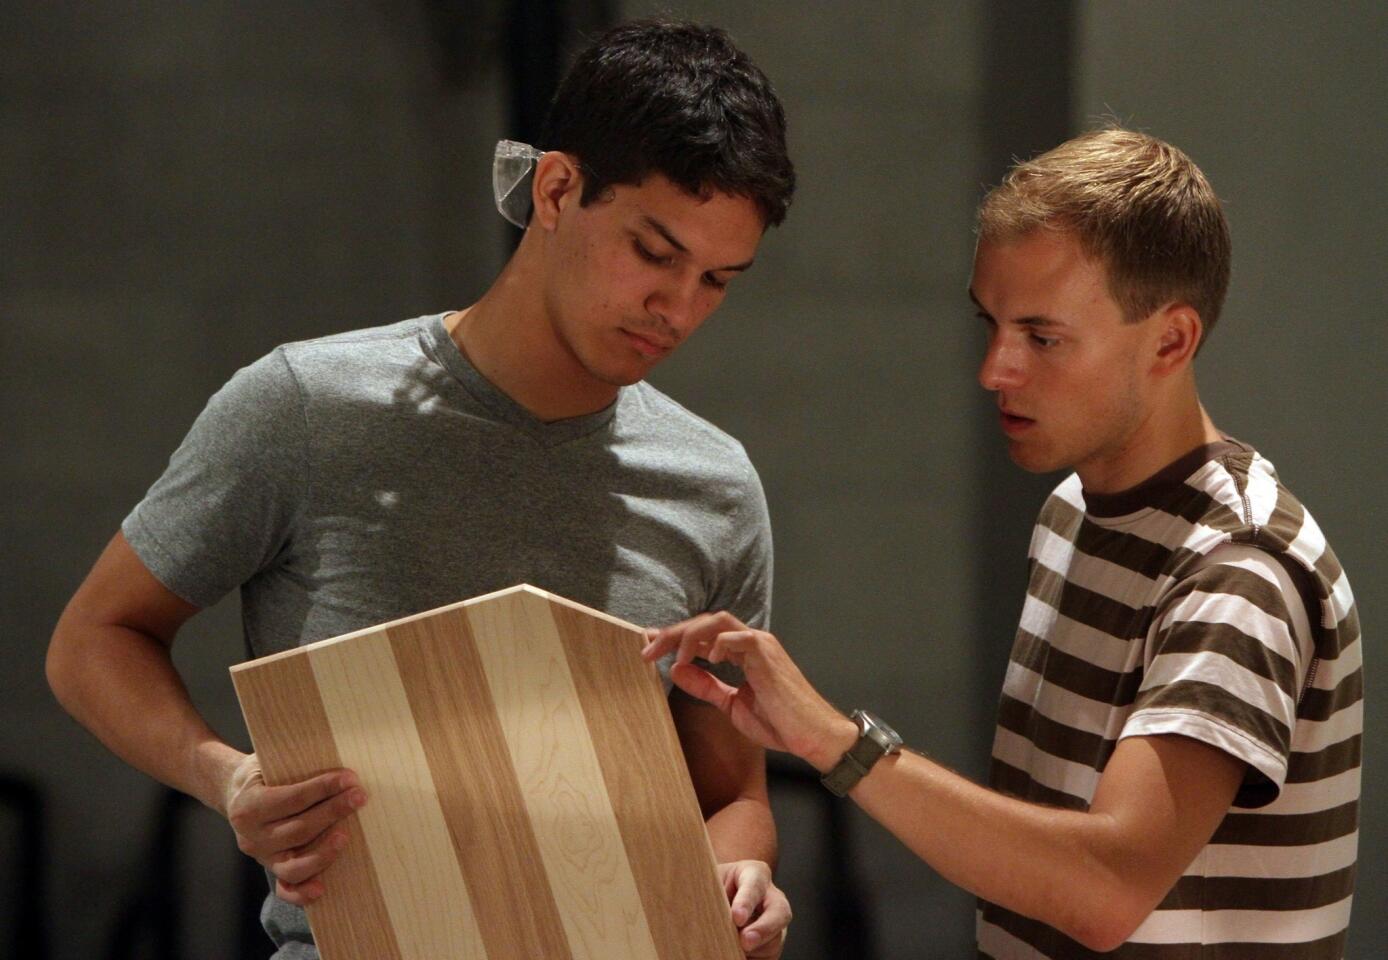 Would-Works co-founder Connor Johnson, right, talks with artisan Diego Gonzalez of Hollywood on a recent Saturday at the Central City Community Outreach Center on skid row in Los Angeles. Participants create cutting boards as part of an enterprise designed to encourage self-sufficiency and promote craft.